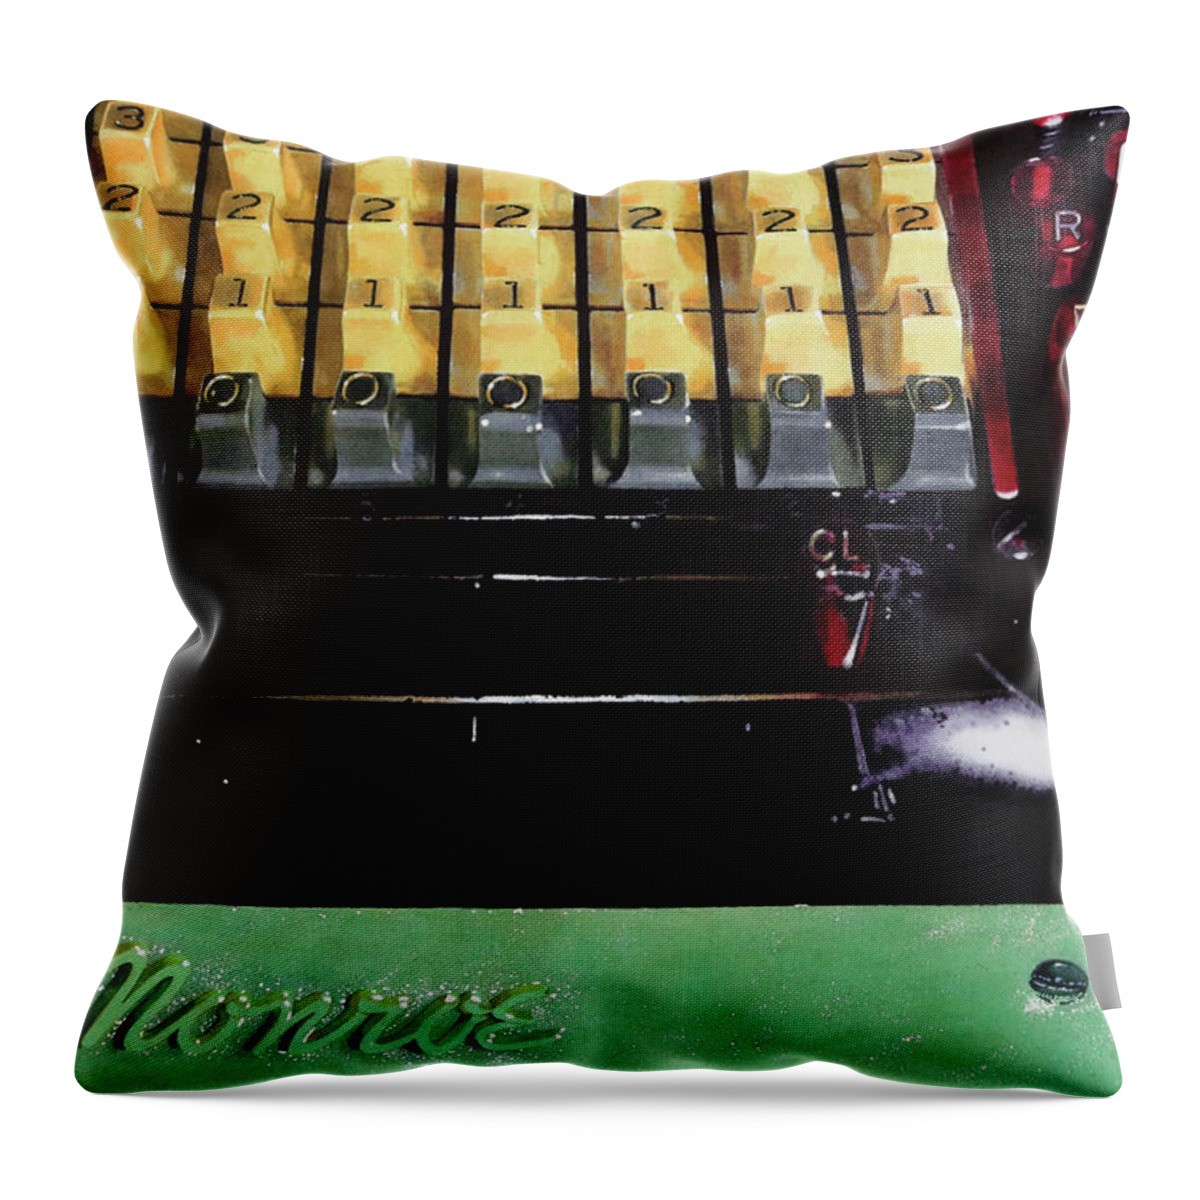 Adding Machine Throw Pillow featuring the painting Addemup by Denny Bond